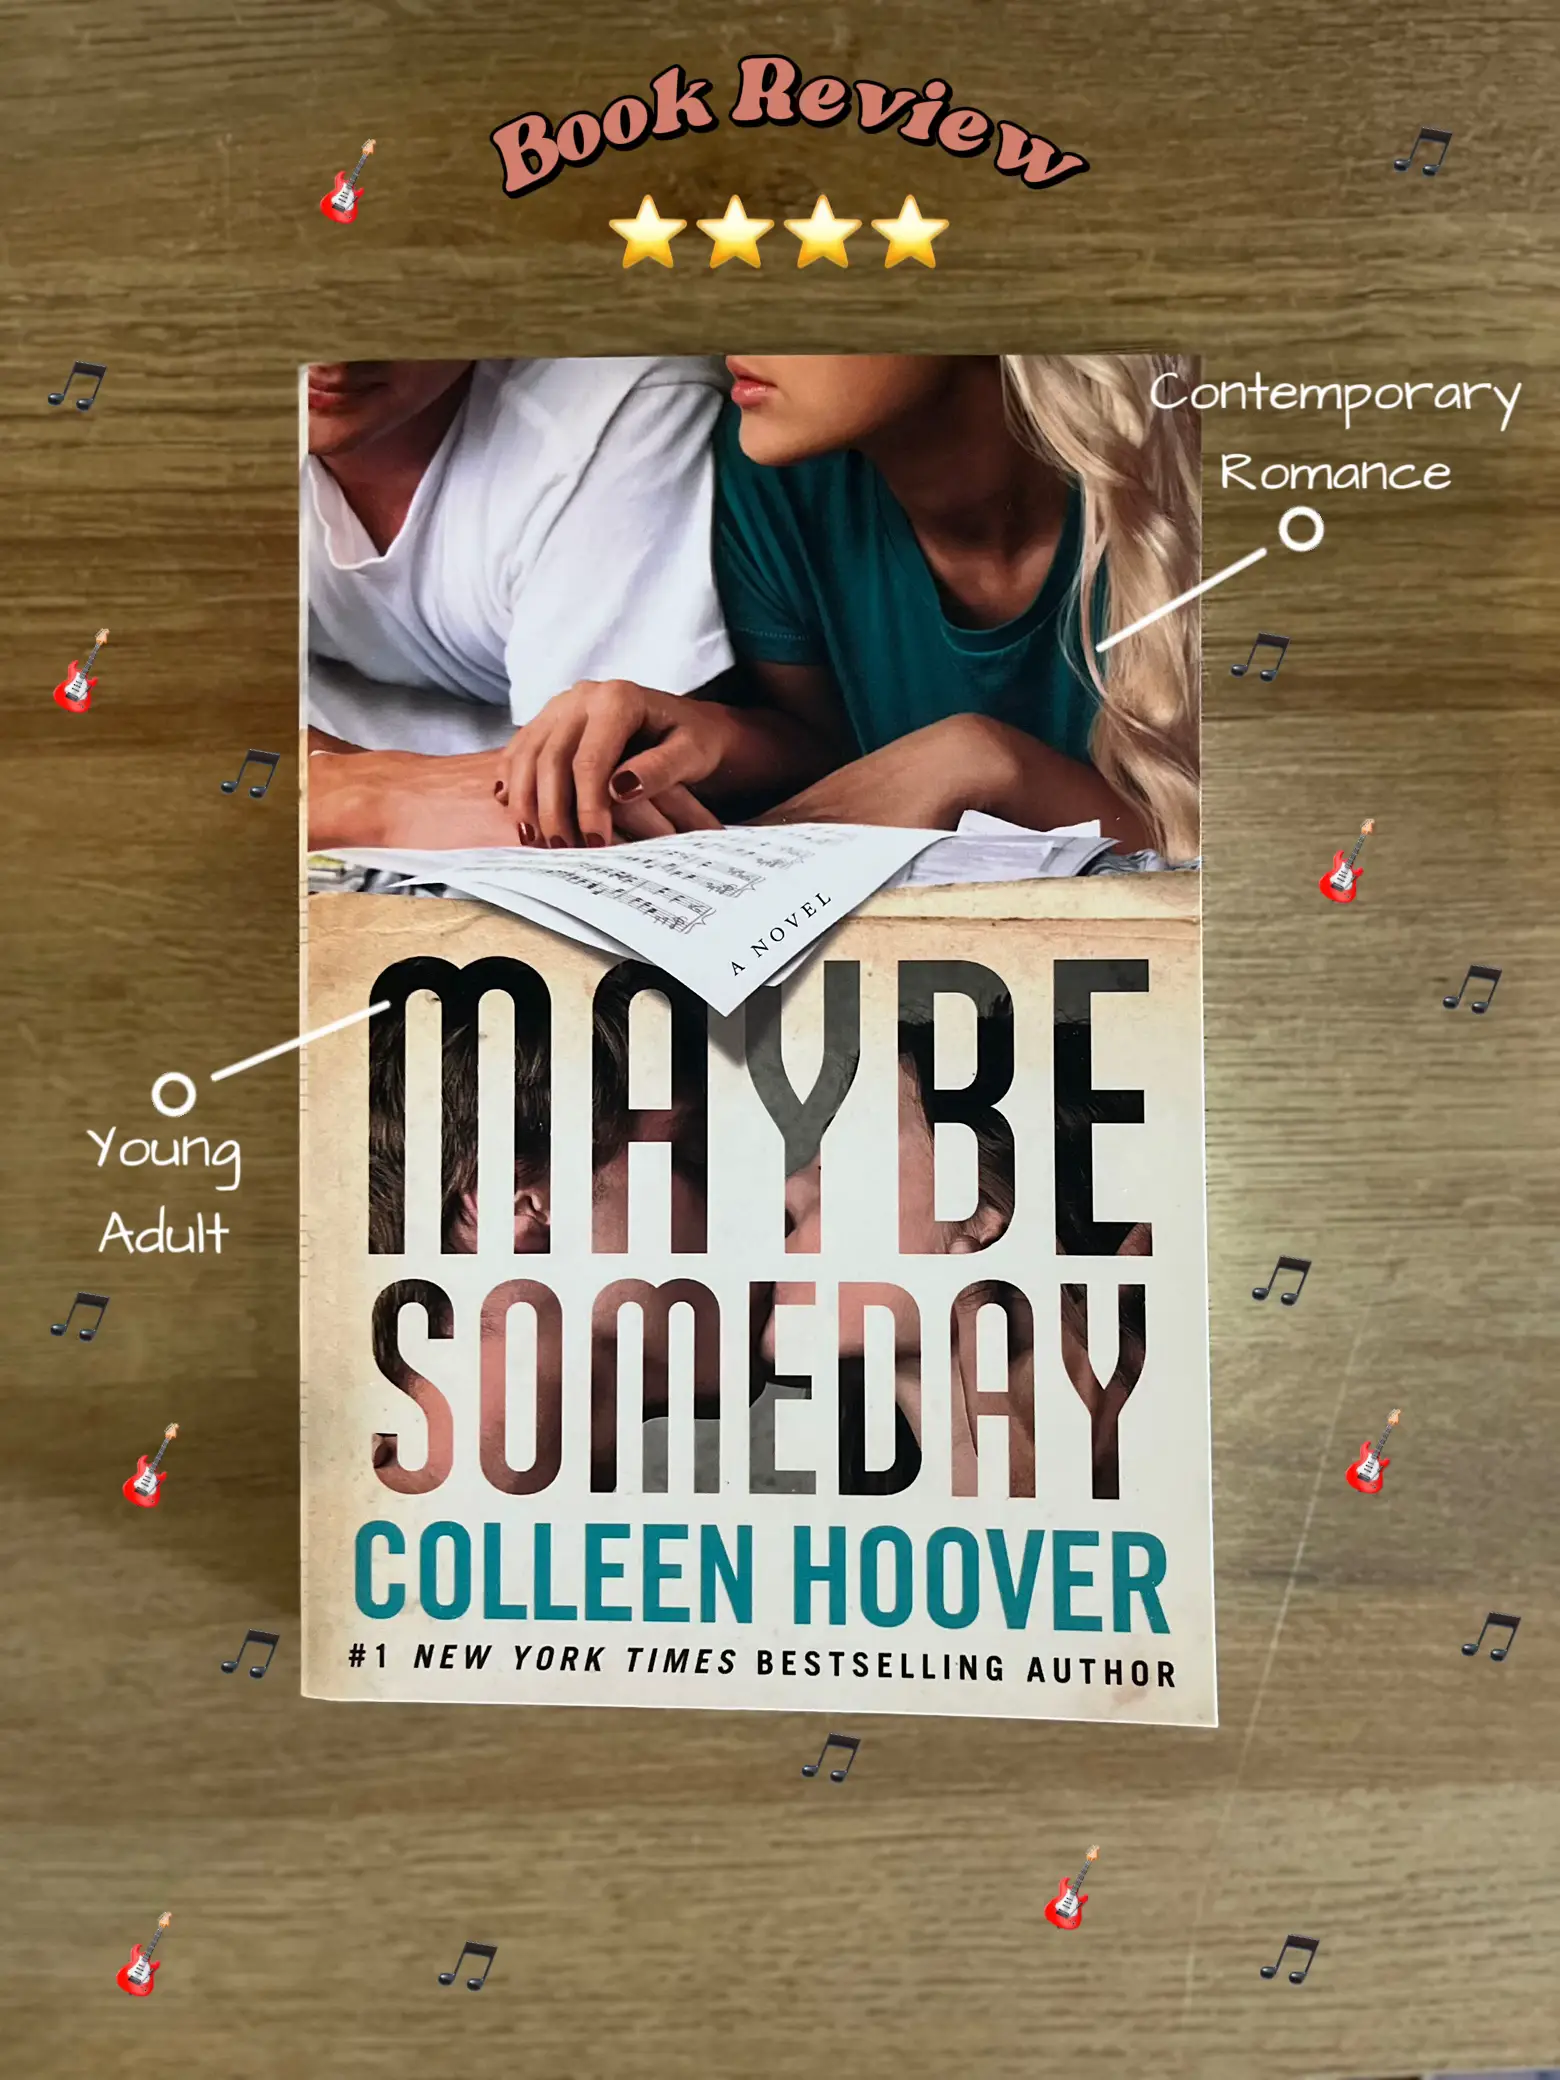 Colleen Hoover Left Me Questioning my Sanity in 'Verity' 